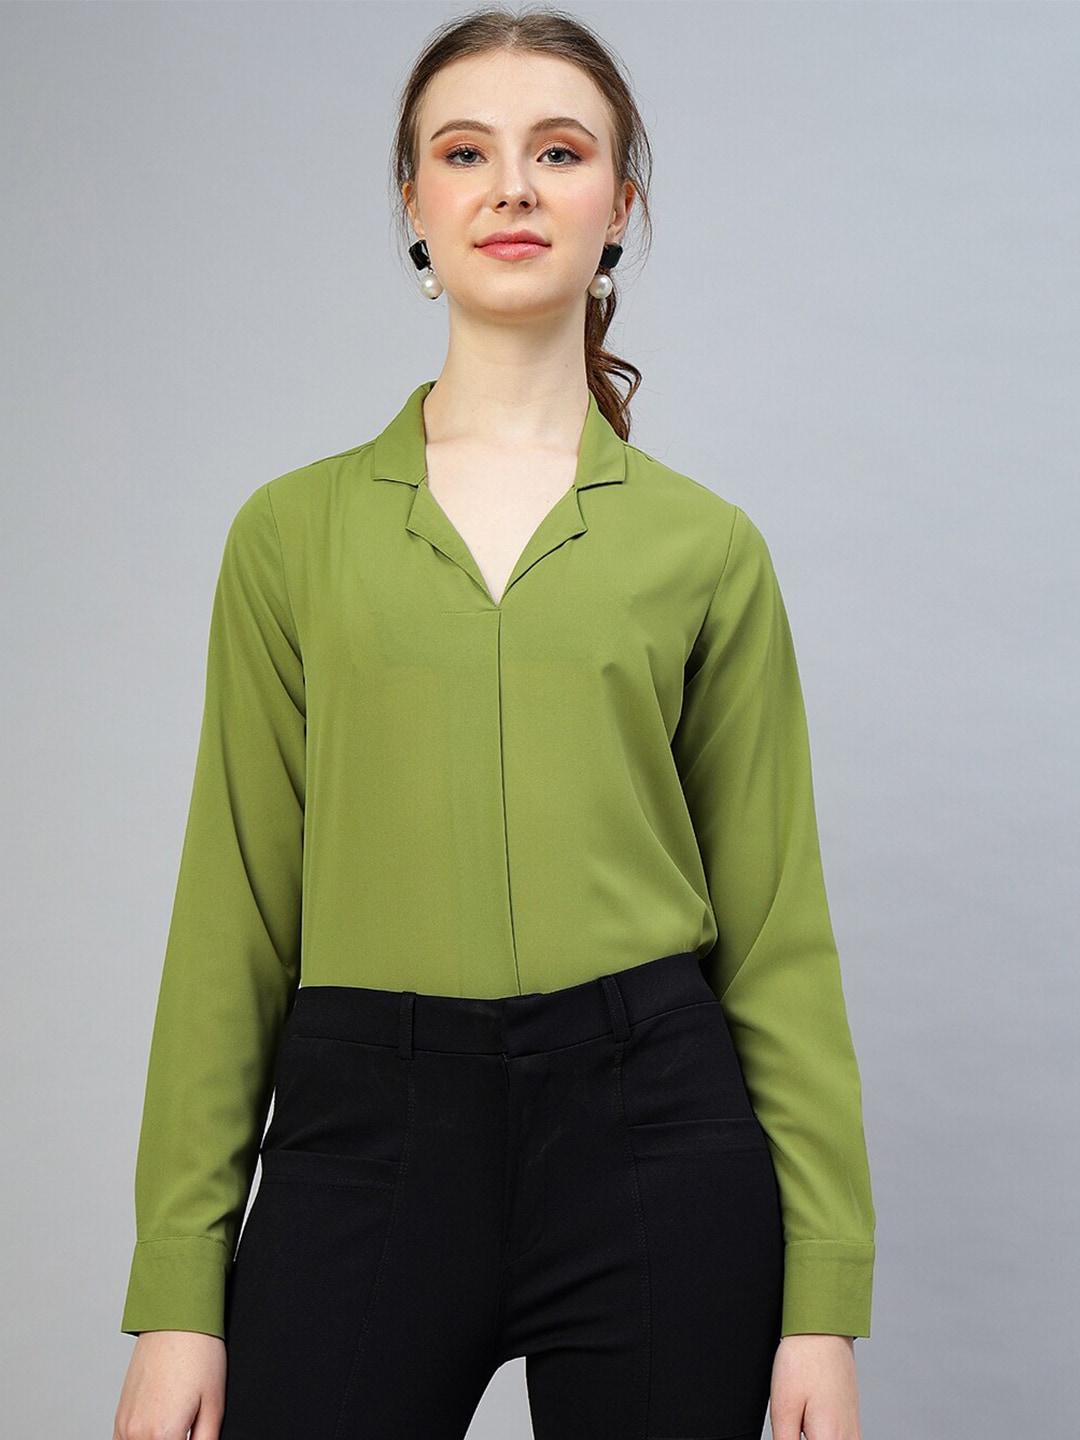 fithub-green-roll-up-sleeves-shirt-style-top